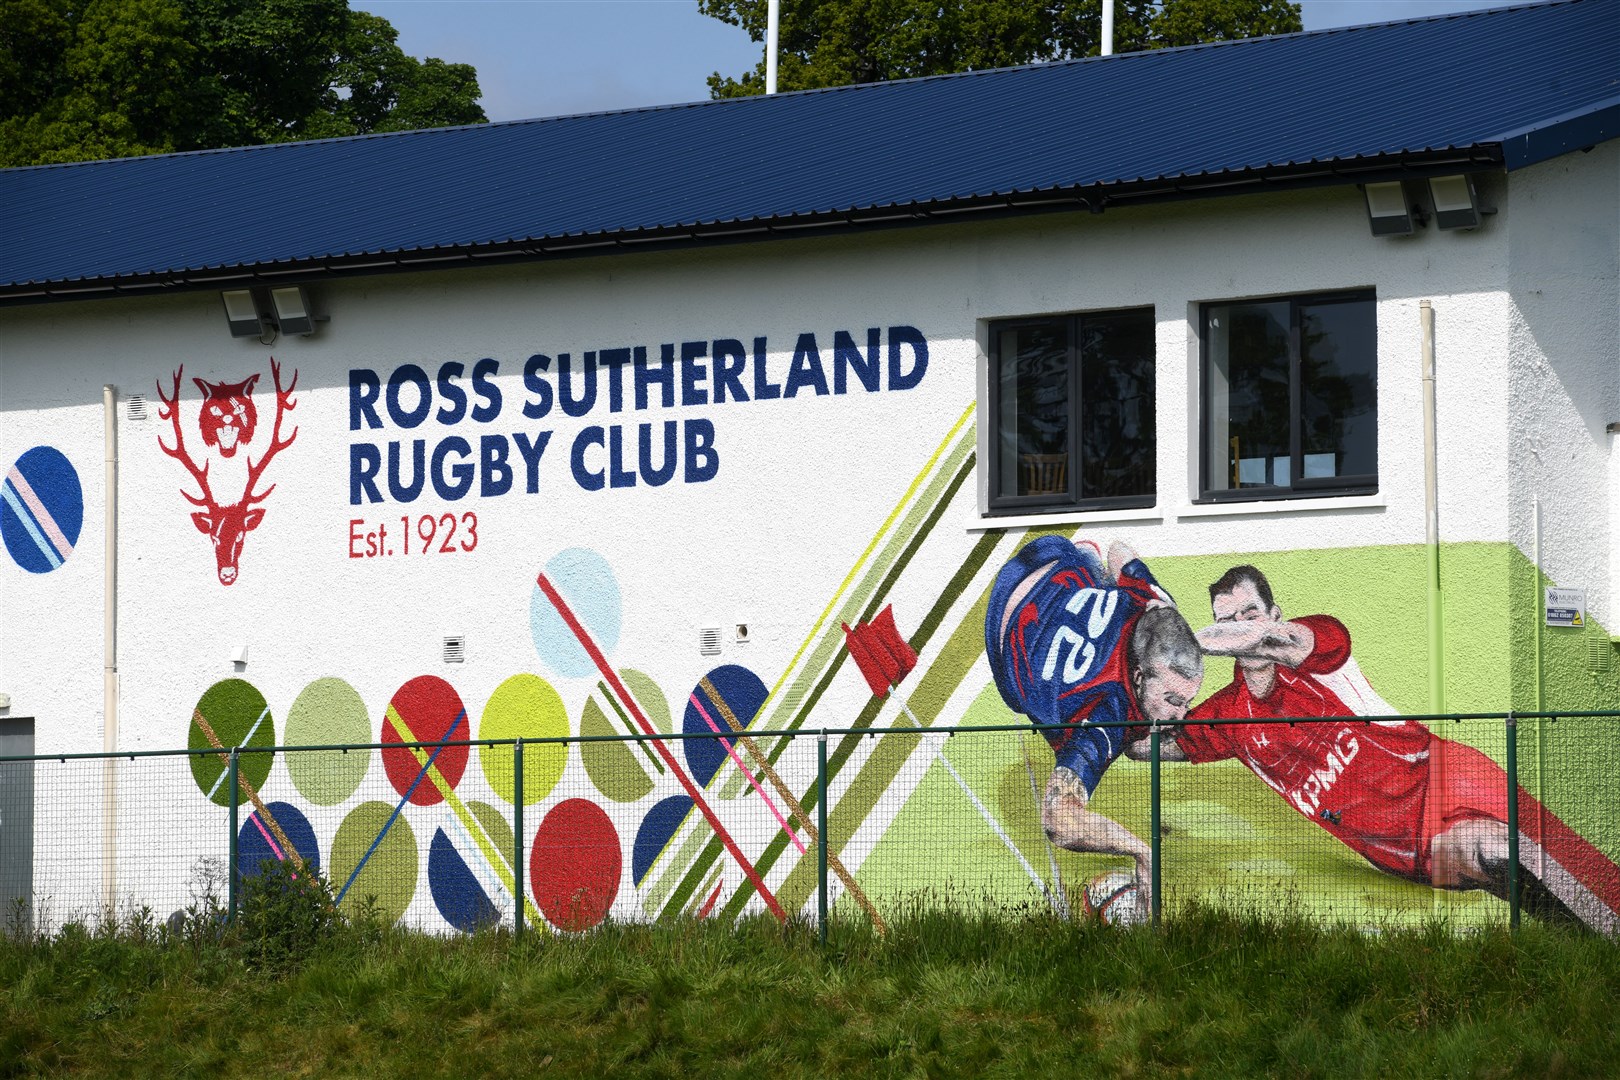 Ross Sutherland Rugby Club beat Skye 129-0.